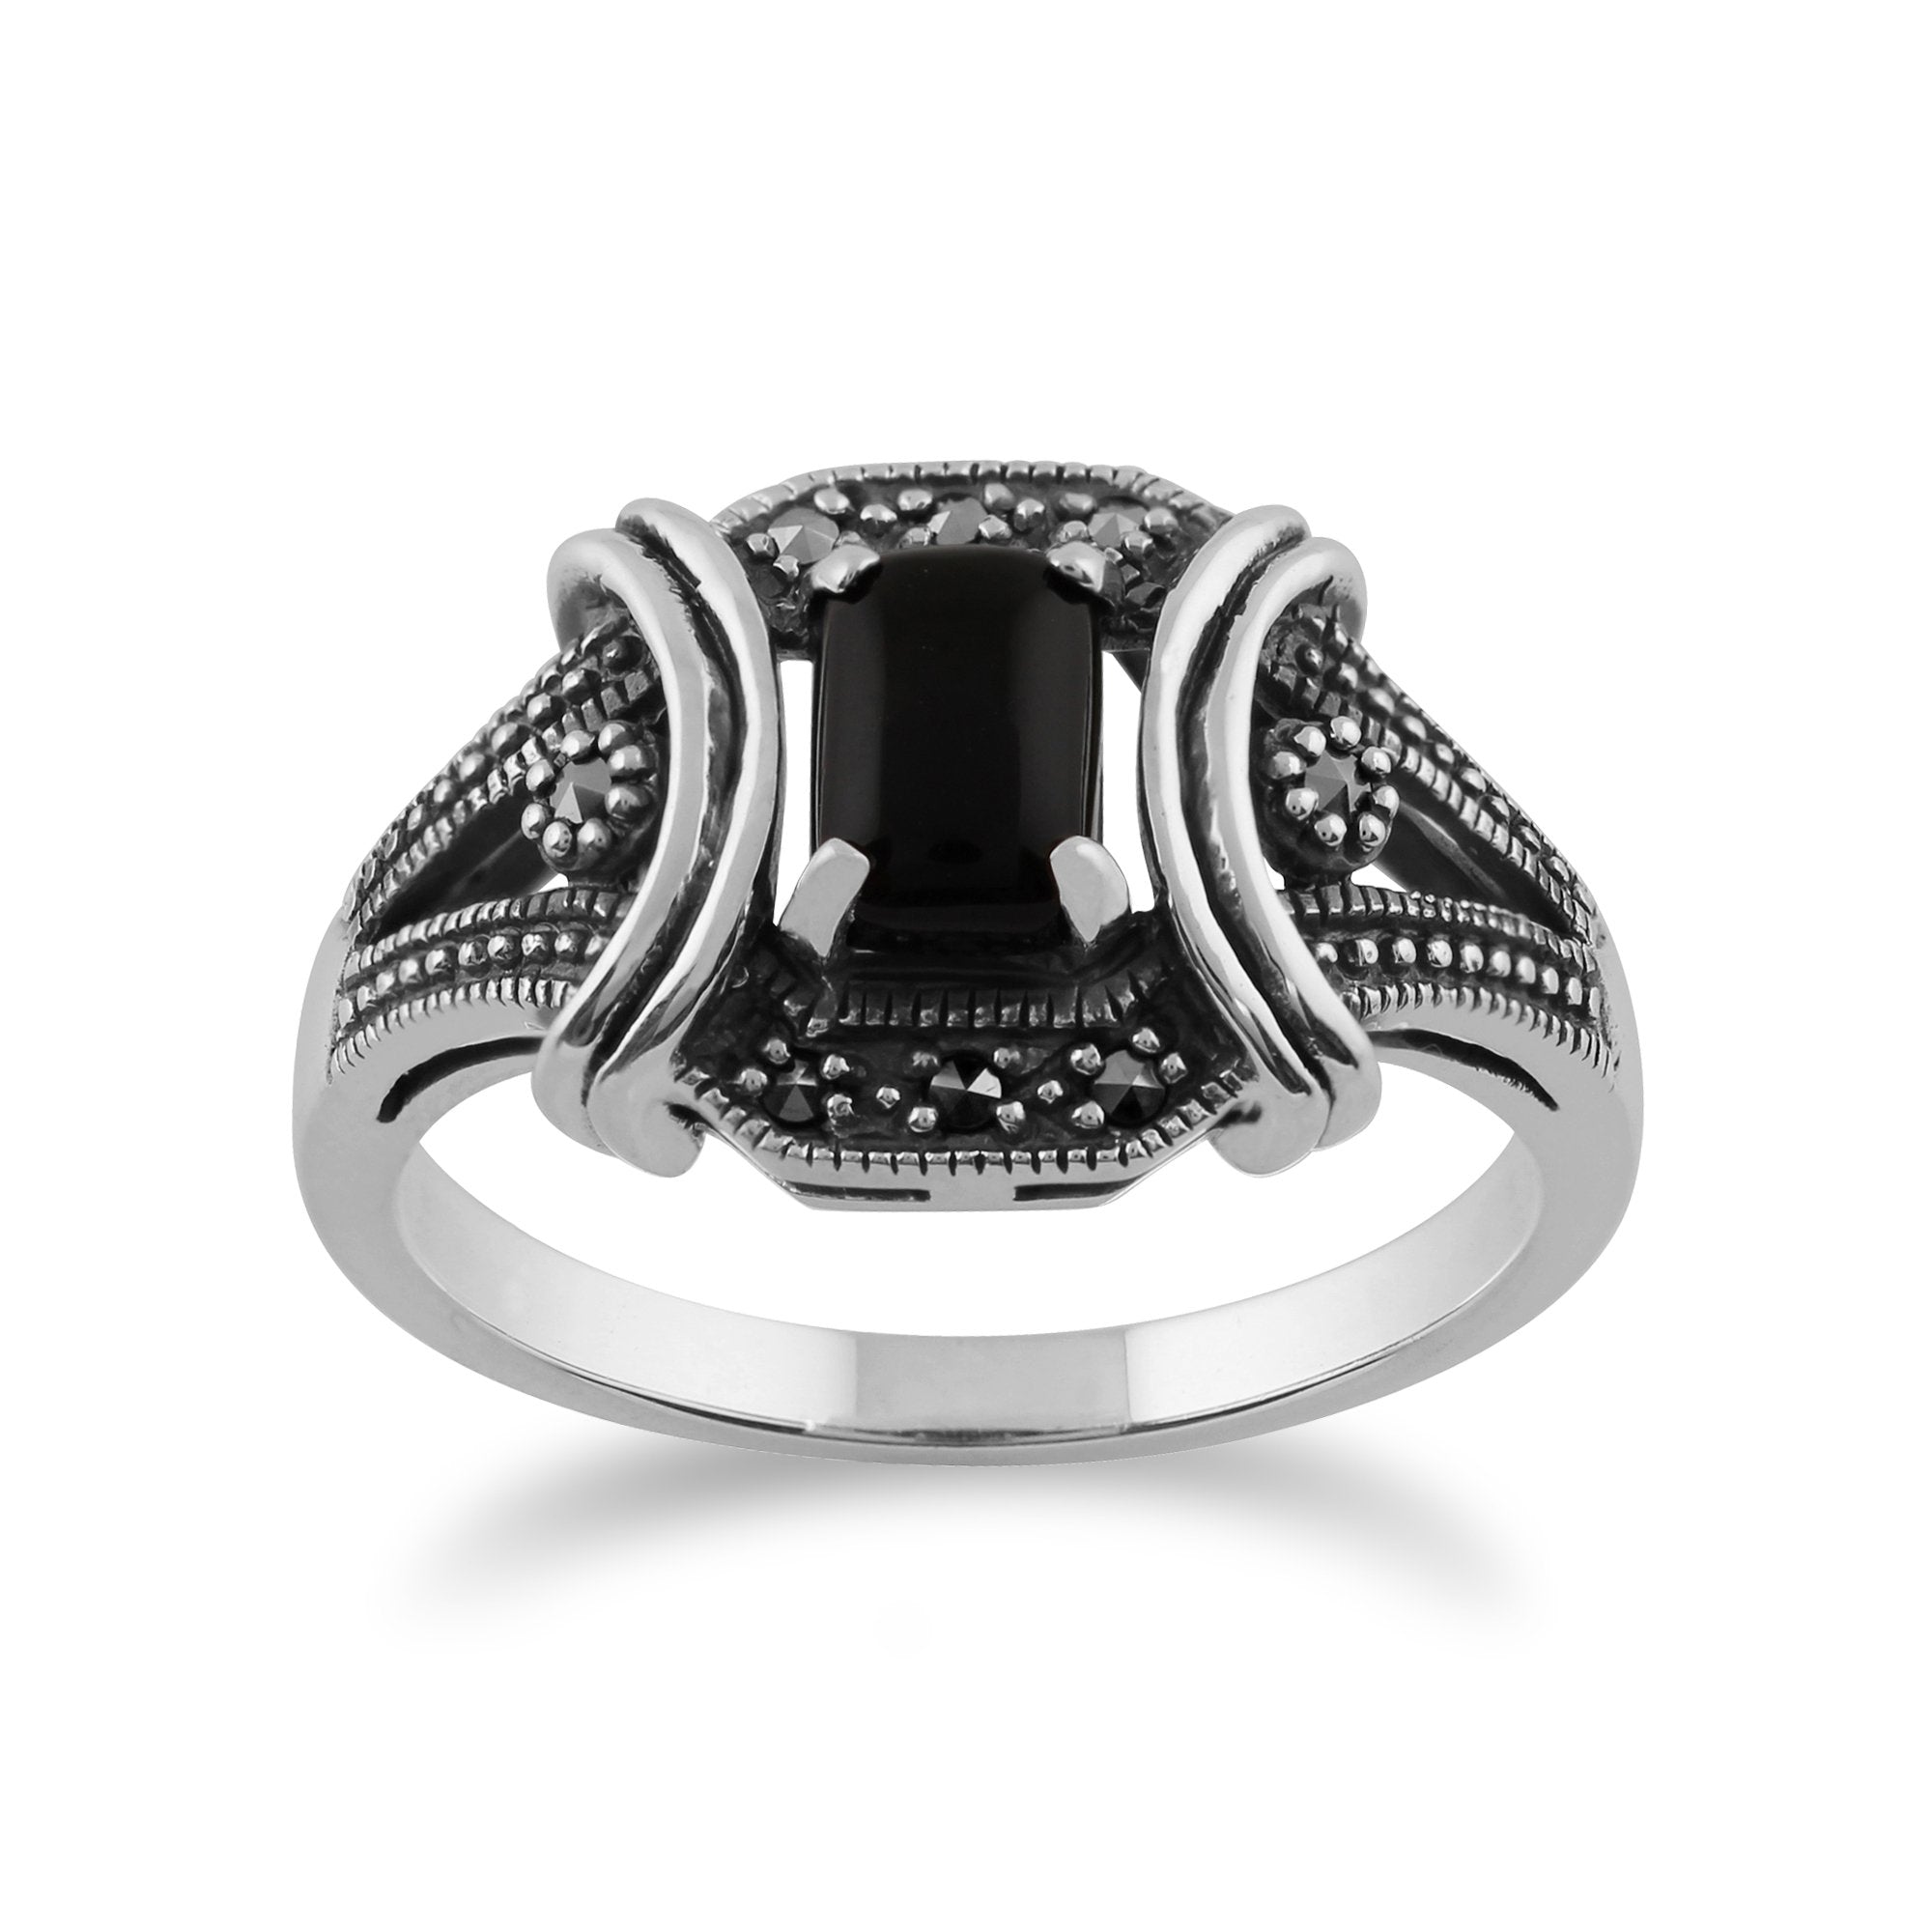 Art Deco Style Black Onyx Cabochon & Marcasite Ring in 925 Sterling Silver